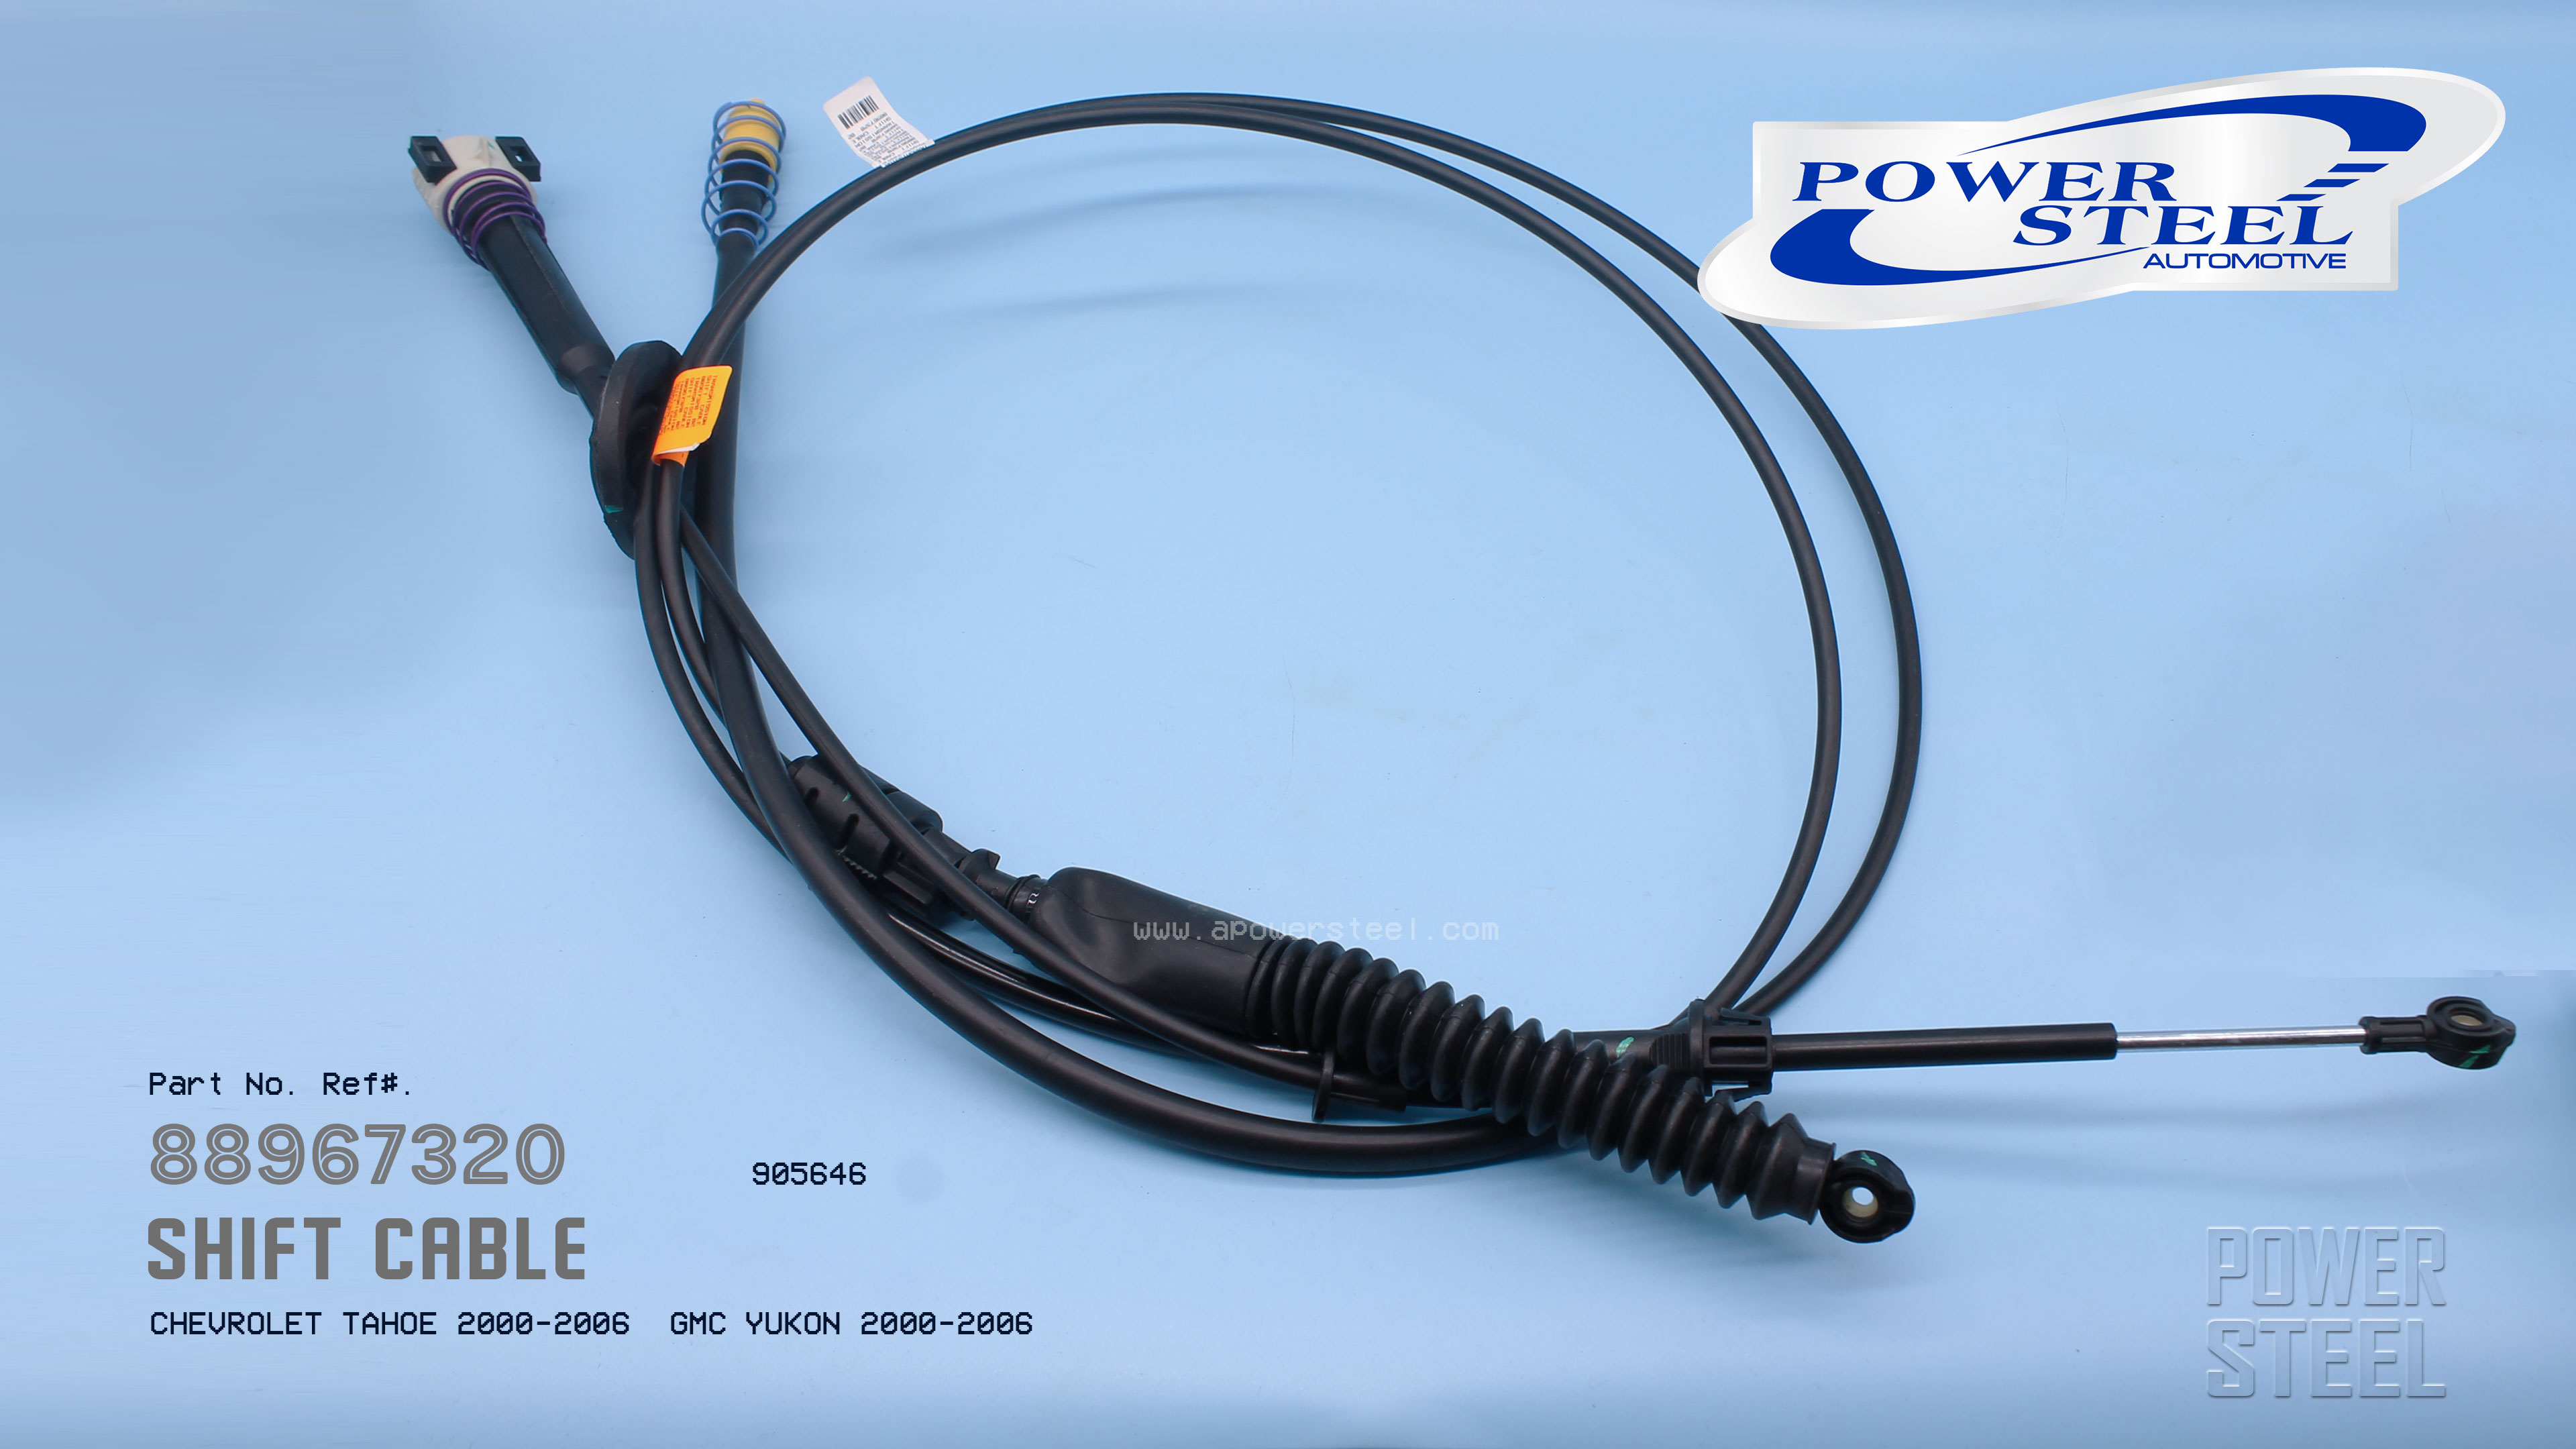 Shift Cable 88967320